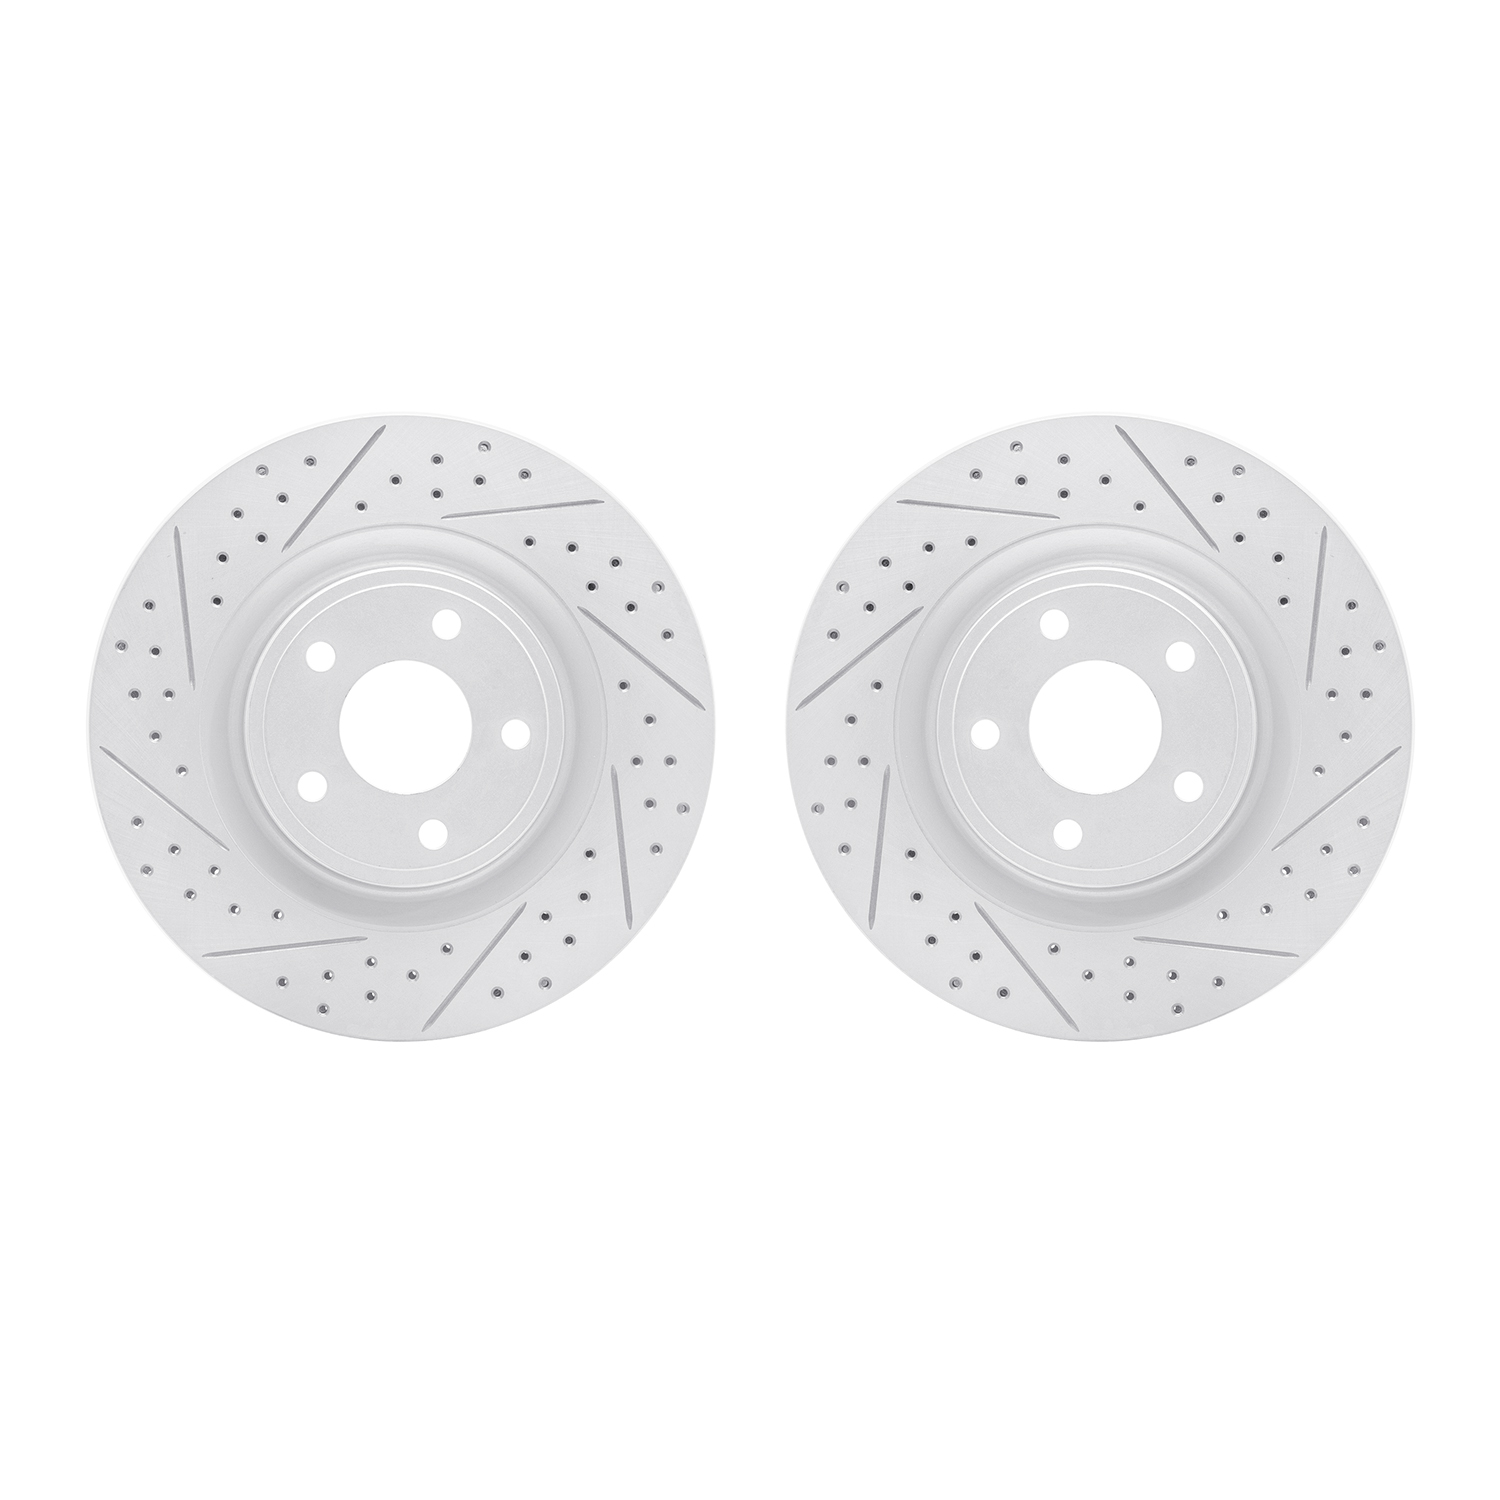 2002-47016 Geoperformance Drilled/Slotted Brake Rotors, 2007-2010 GM, Position: Front